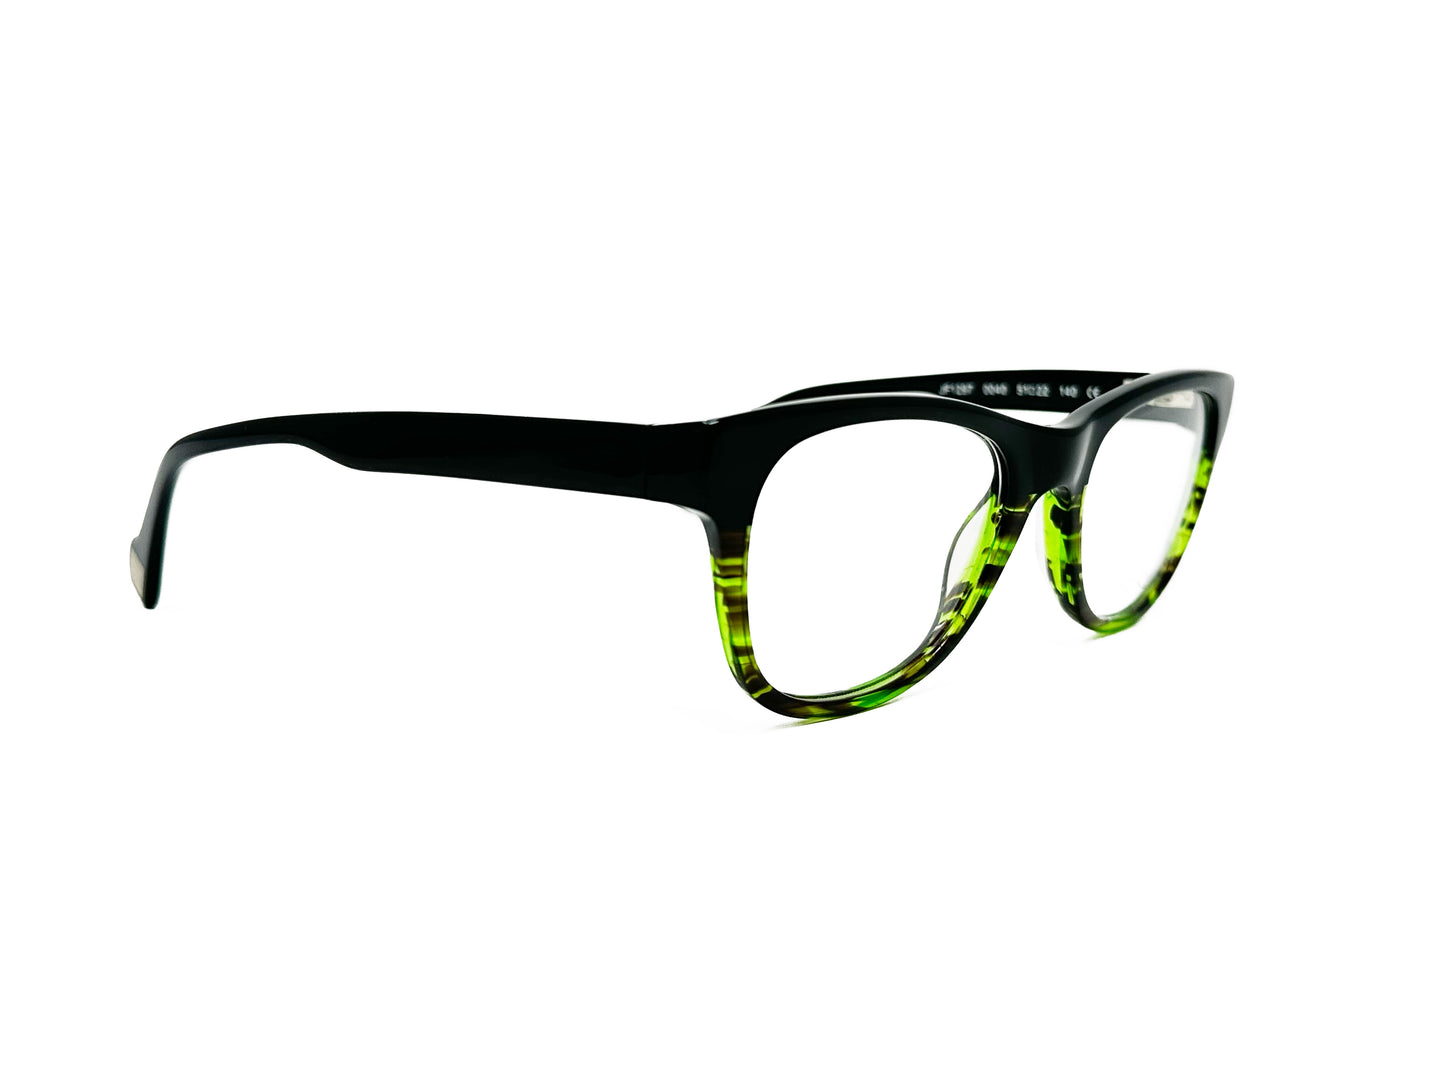 JF Rey rounded-square, acetate, optical frame. Model: JF1297. Color: 0040 - Black with semi-transparent lime green stripes on bottom of frame. Side view.